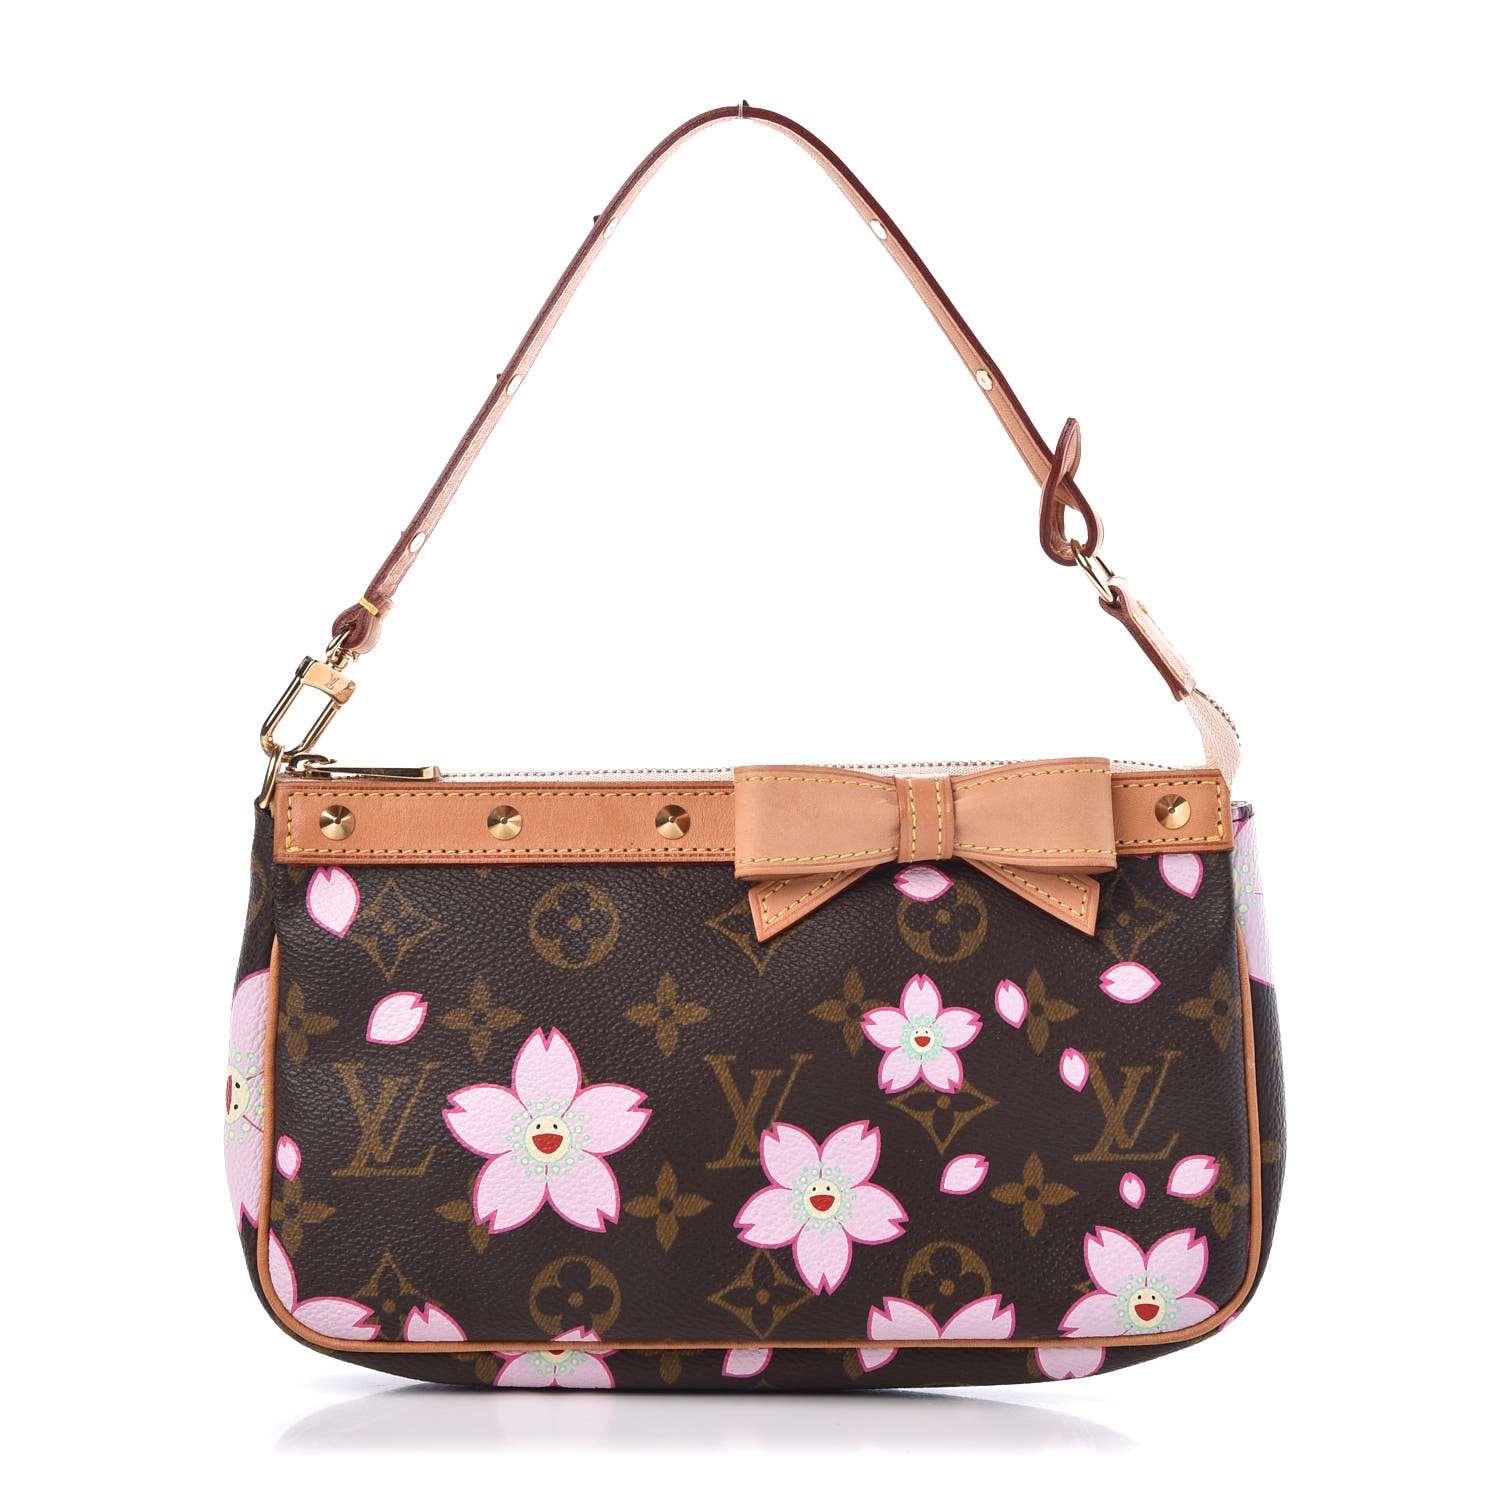 Louis Vuitton Bandeau Cherry Blossom - Bags of CharmBags of Charm